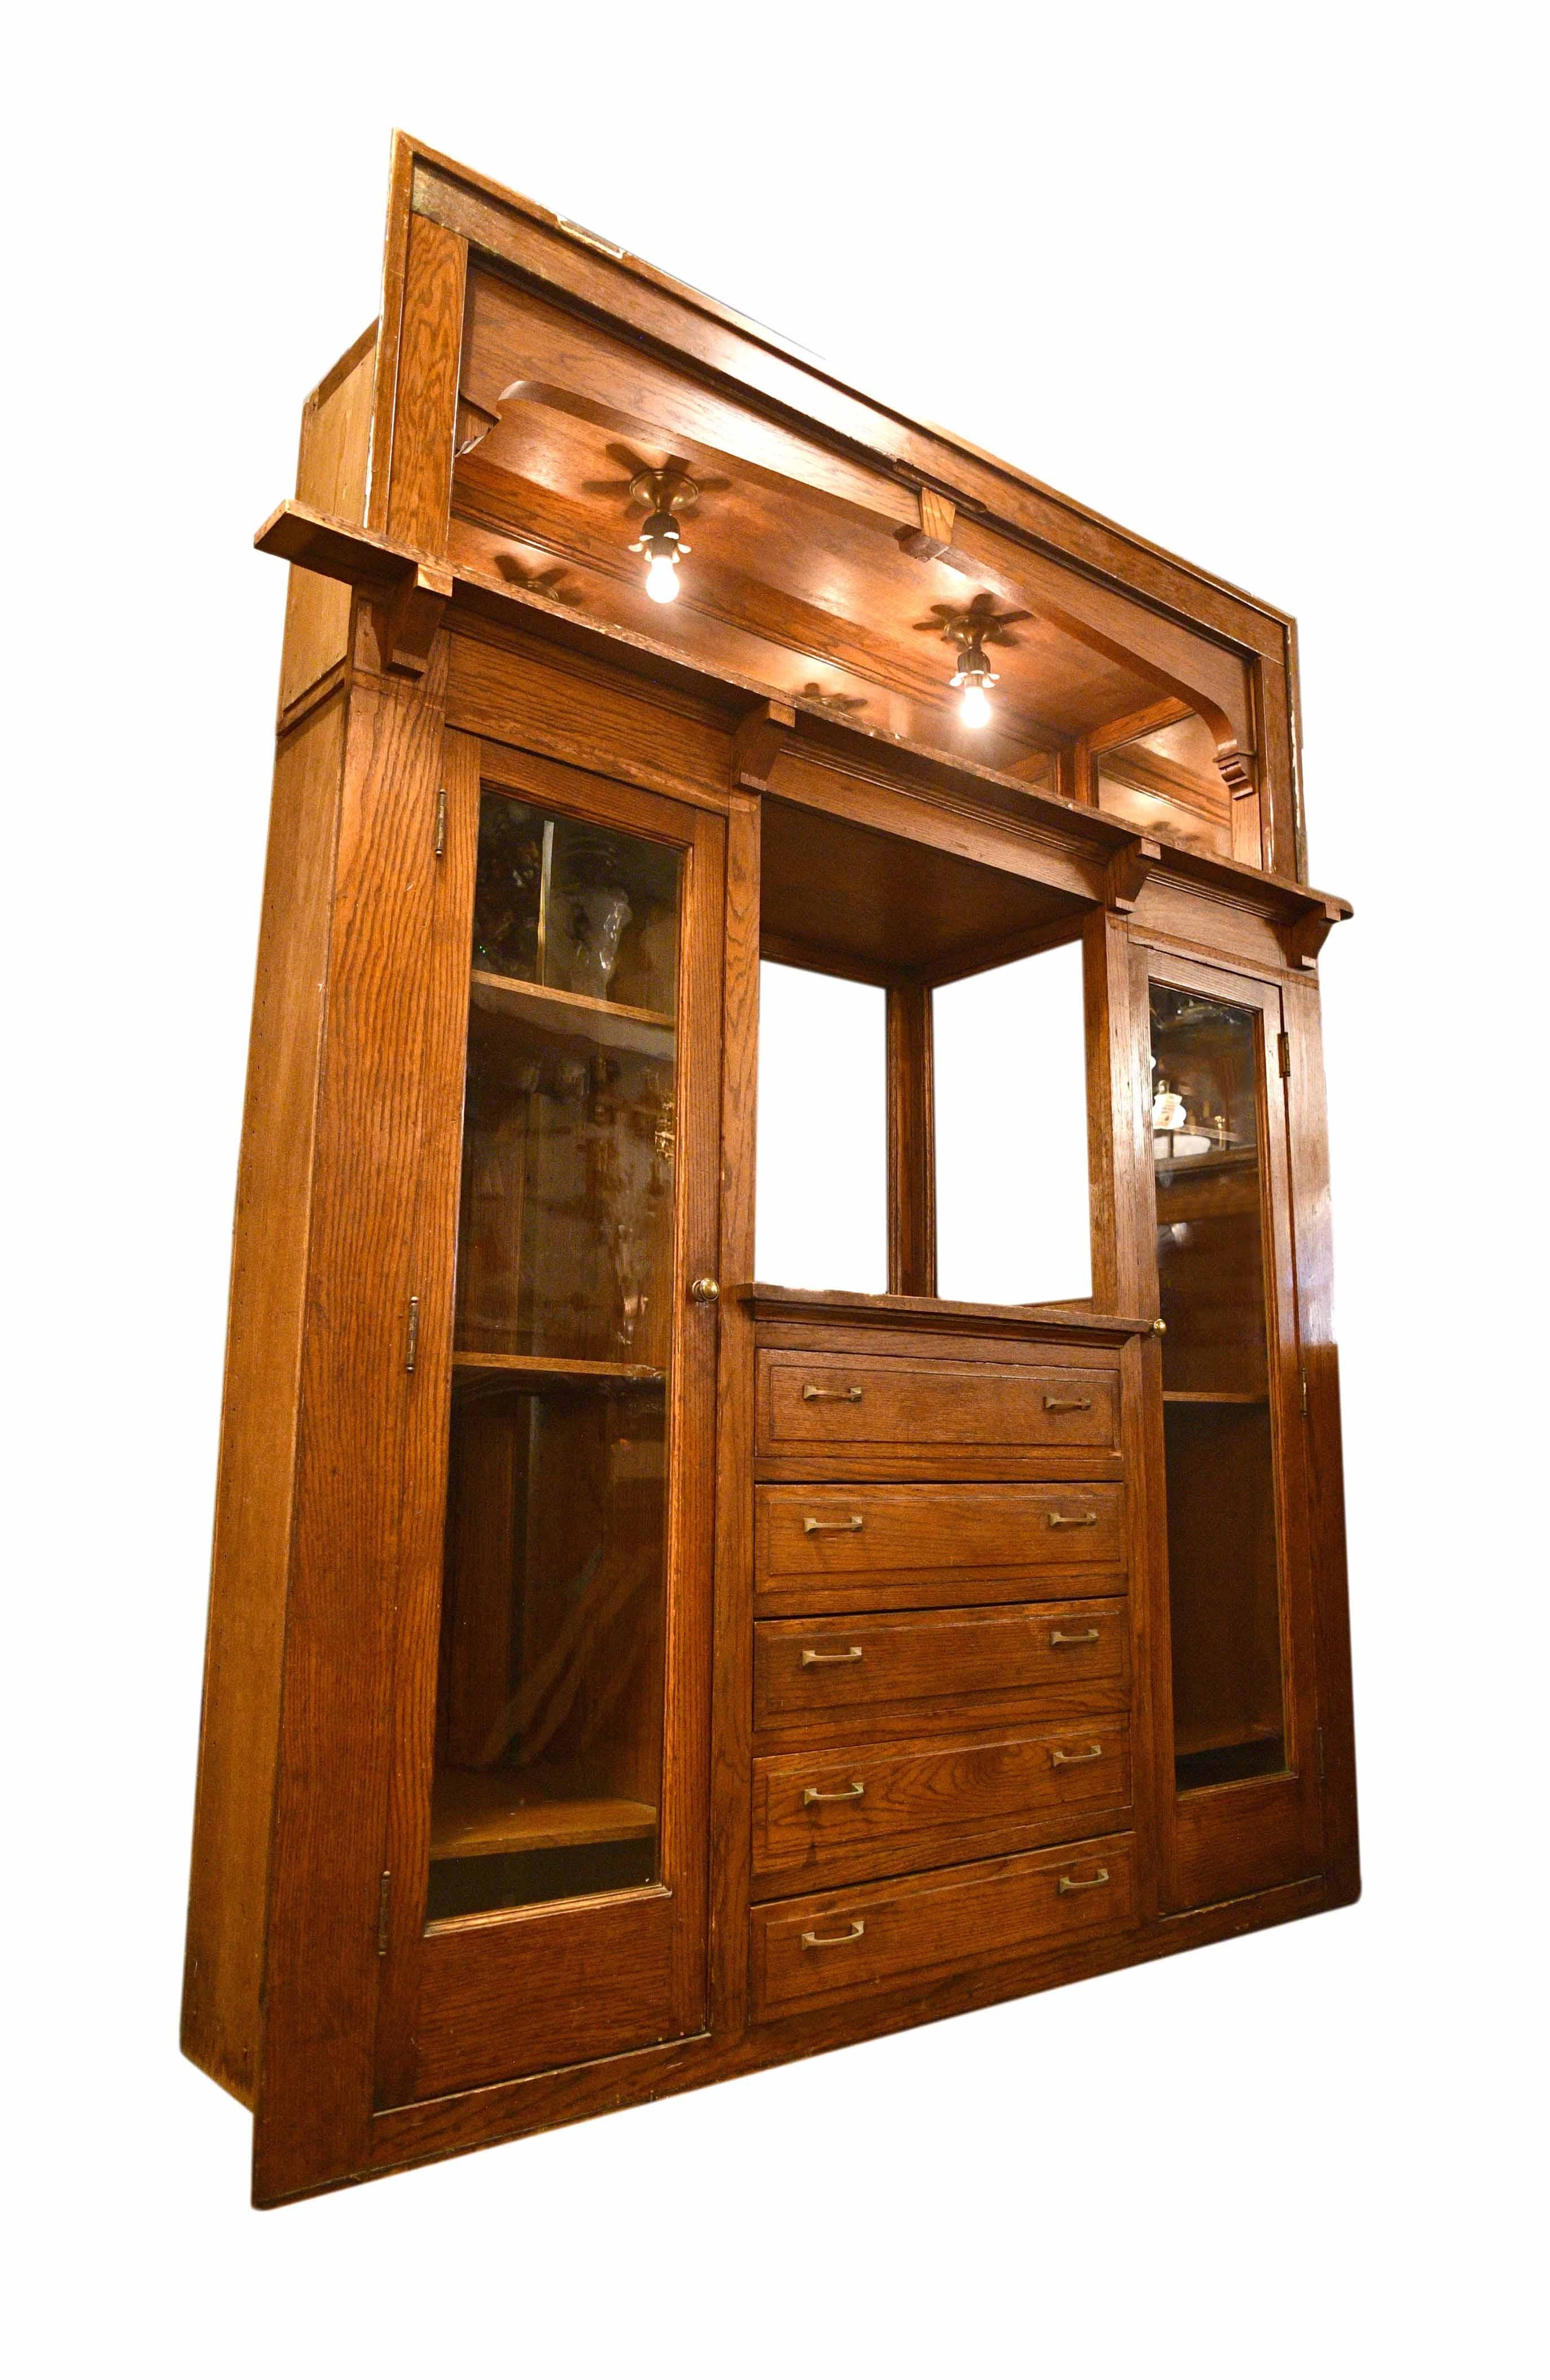 This finely crafted buffet is made of handsome oak and features 6 mirrors, two large cabinets, and 5 drawers, giving it ample storage space. Uniquely, two floral flushmount lights hang from the top of the buffet!